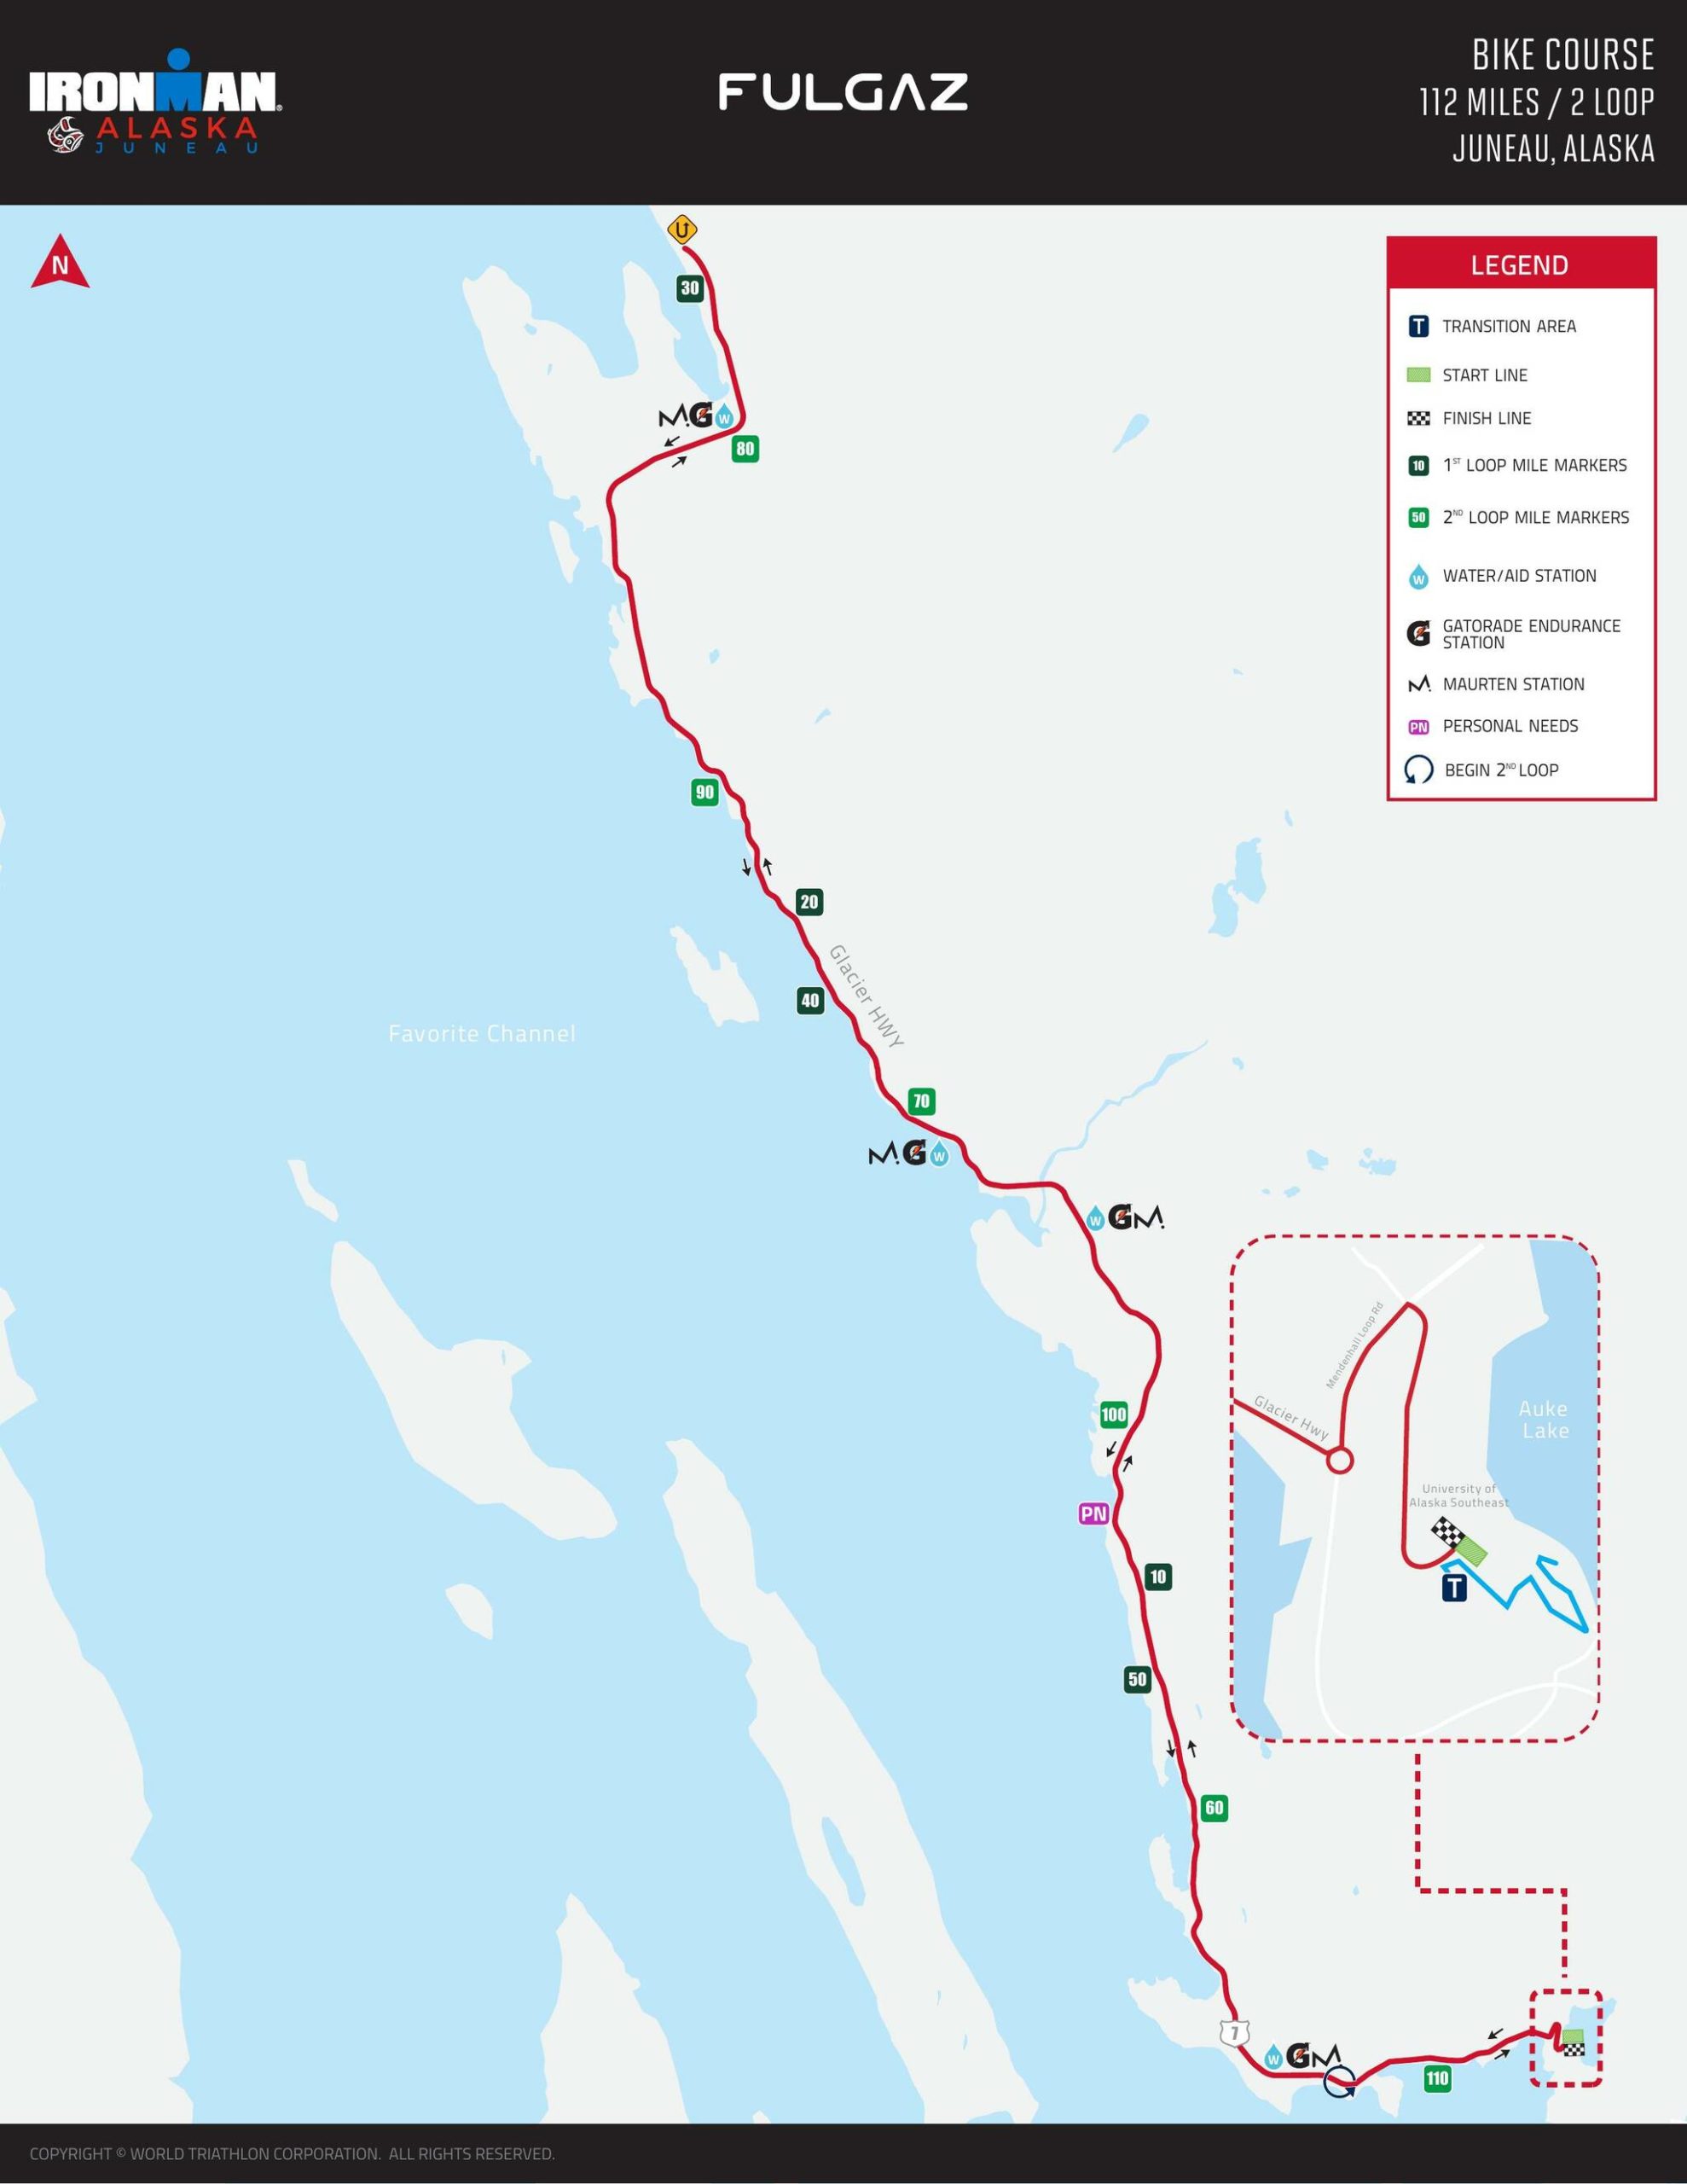 The 112-mile bike portion begins immediately after the swim at the University of Alaska Southeast before heading out the road for an out-and-back that finishes at the starting point. (Courtesy / Travel Juneau)